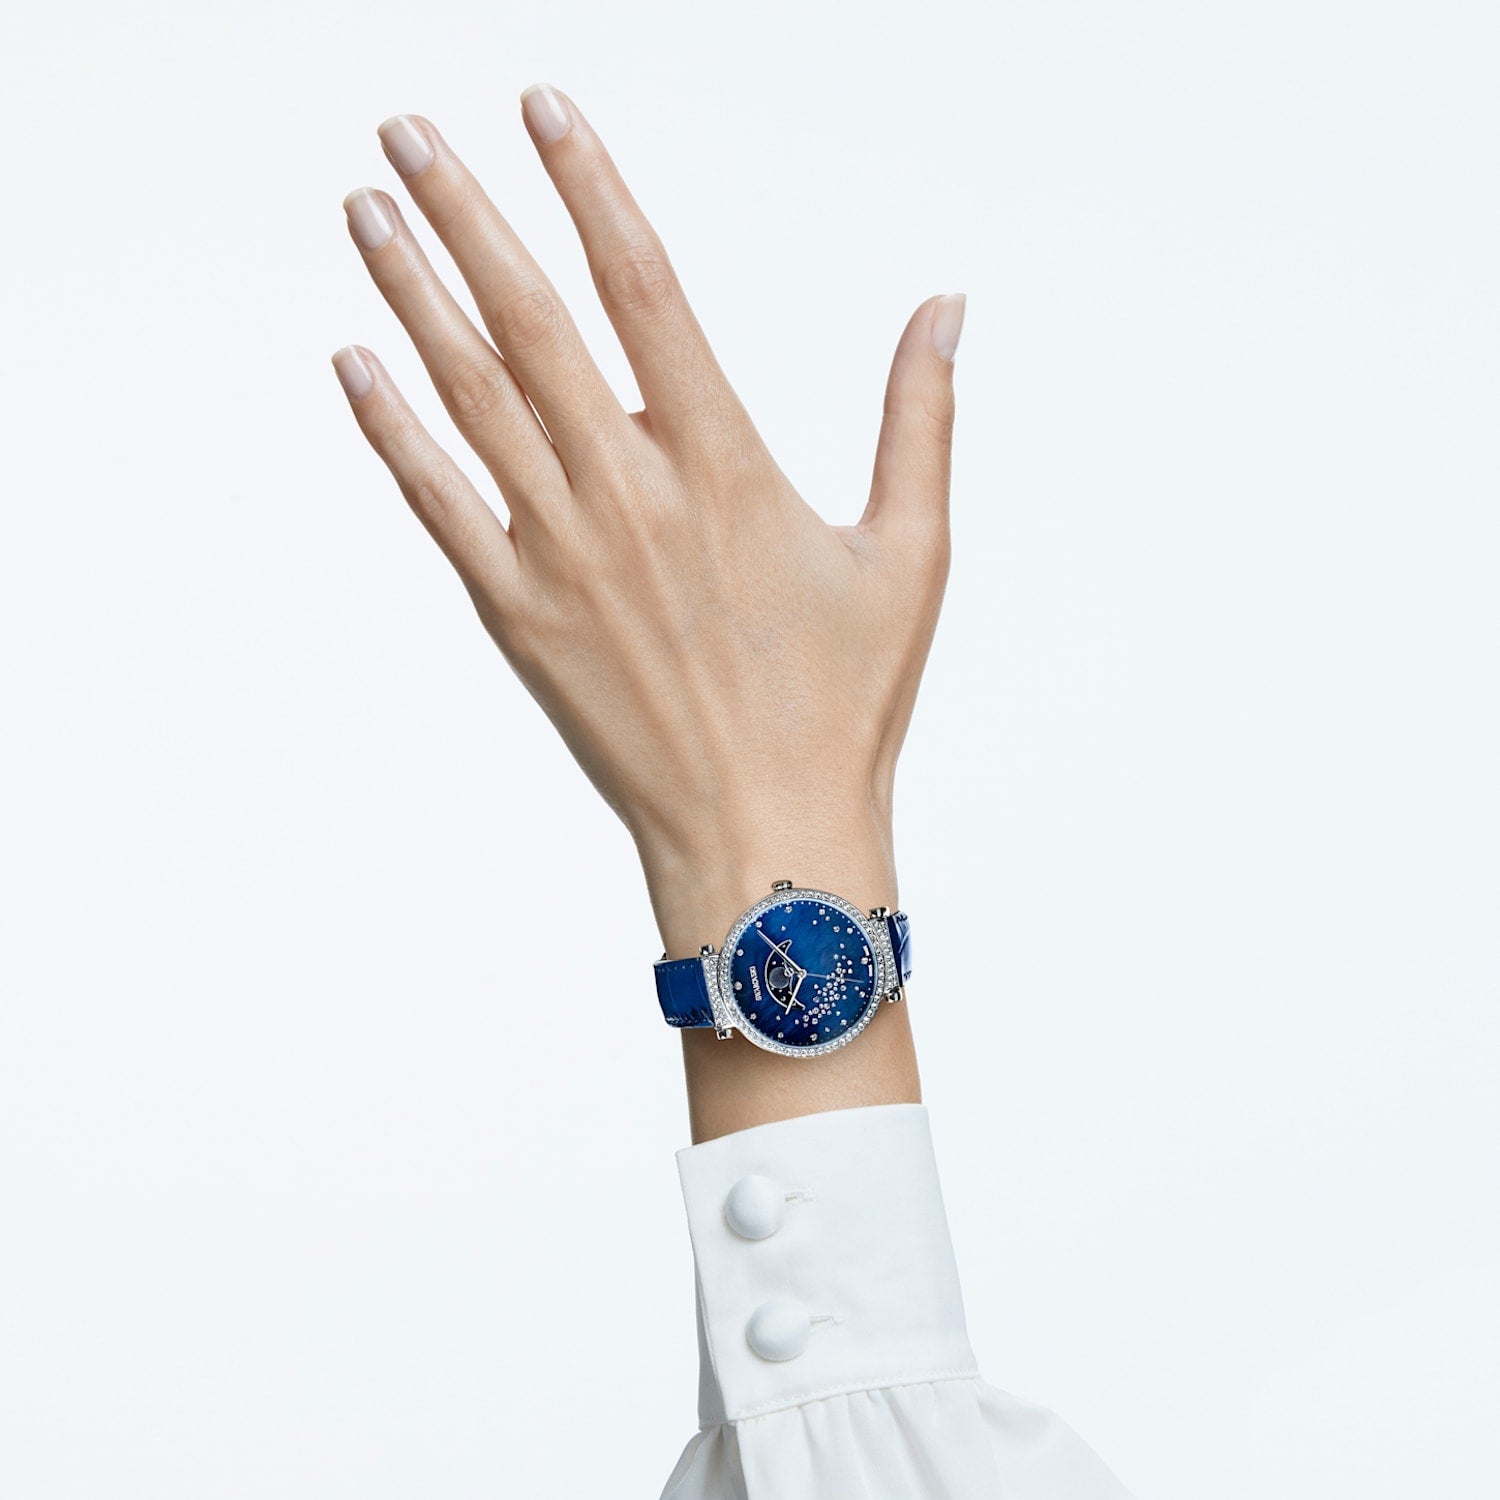 Swarovski Passage Moon Phase Blue Dial Blue Leather Strap Watch for Women - 5613320